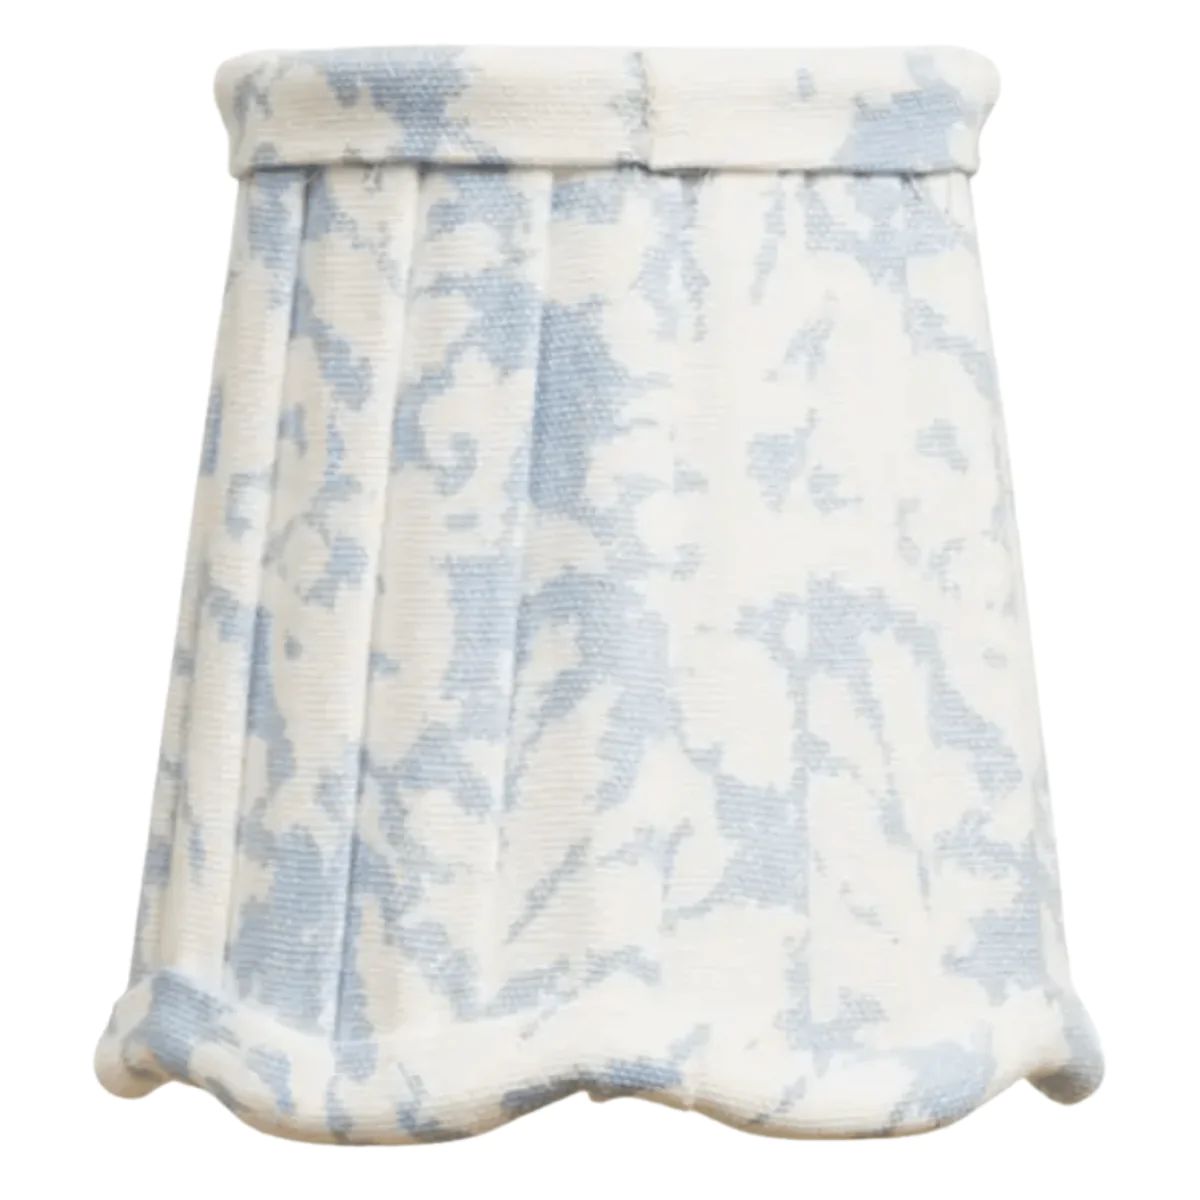 Soft Blue & White Scalloped Sconce Shade | The Well Appointed House, LLC